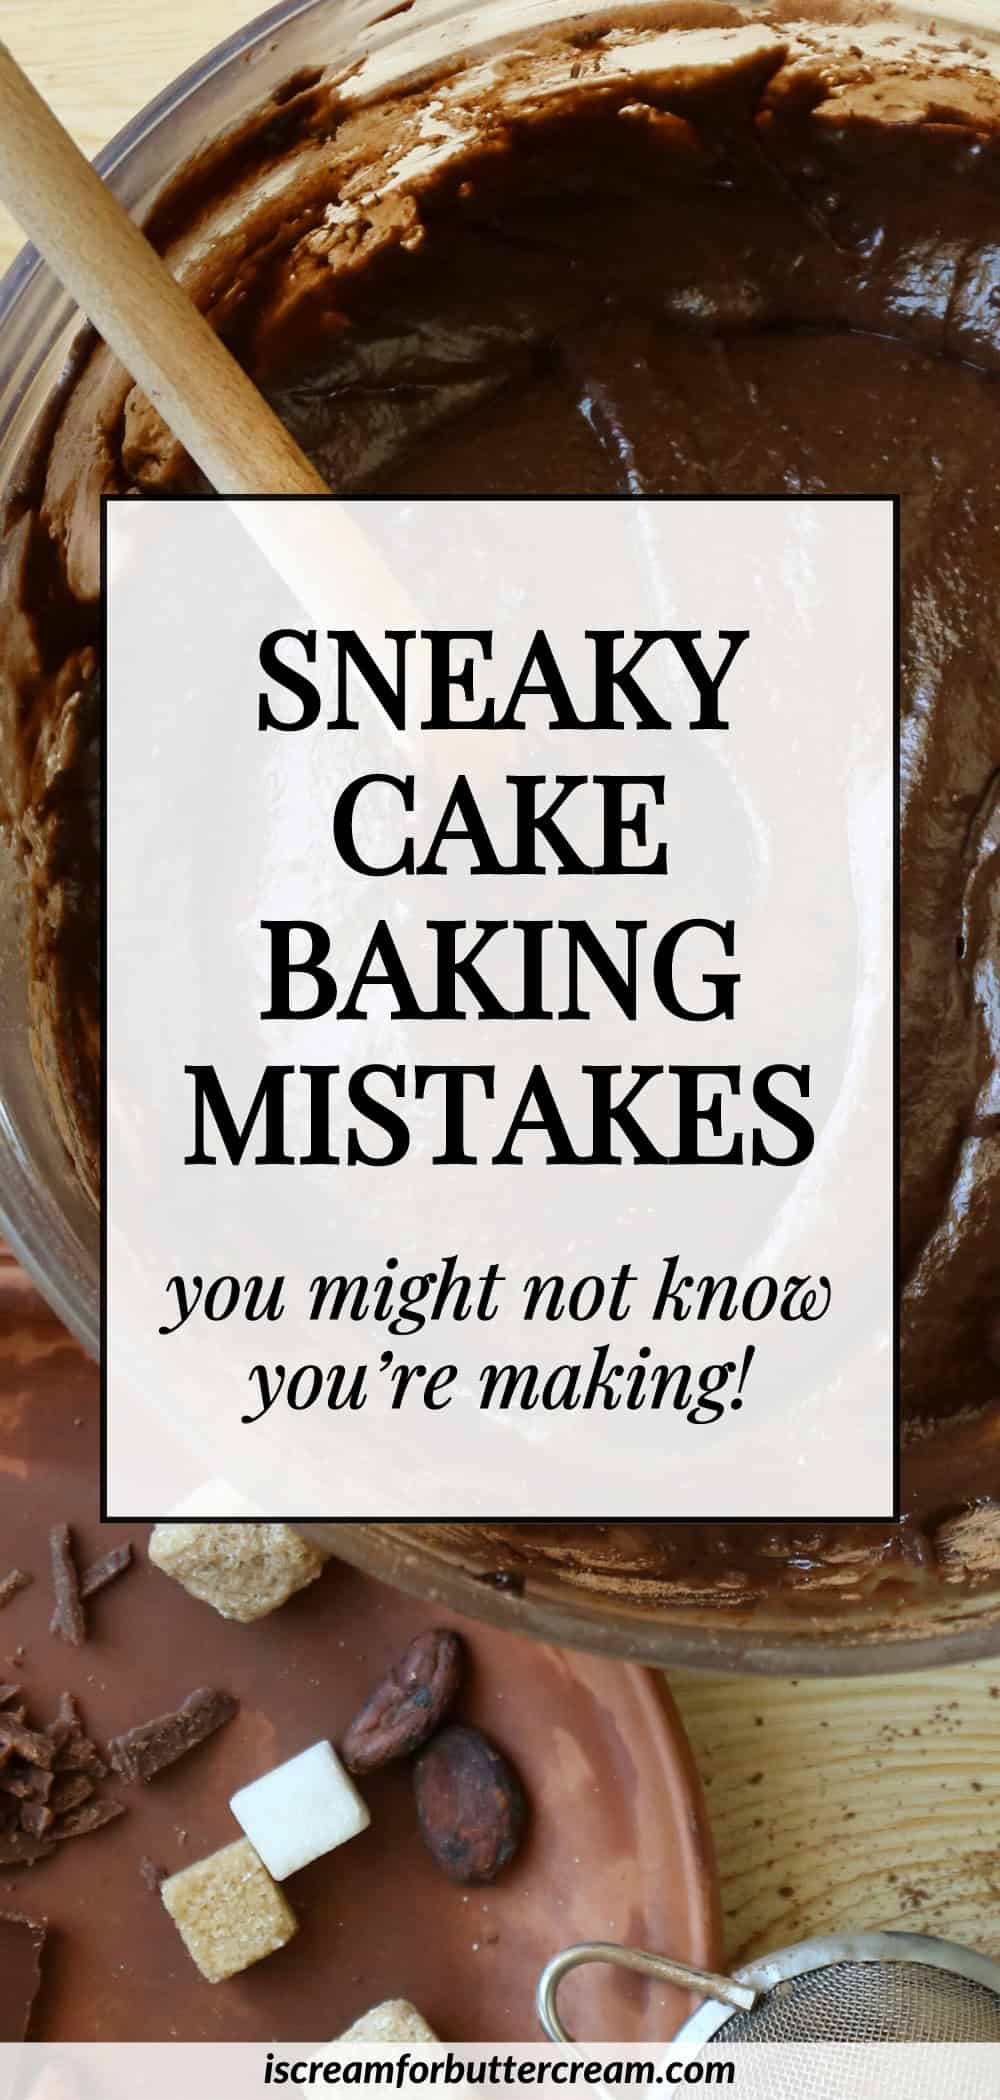 Pinterest image with chocolate cake batter in a mixing bowl and text overlay.